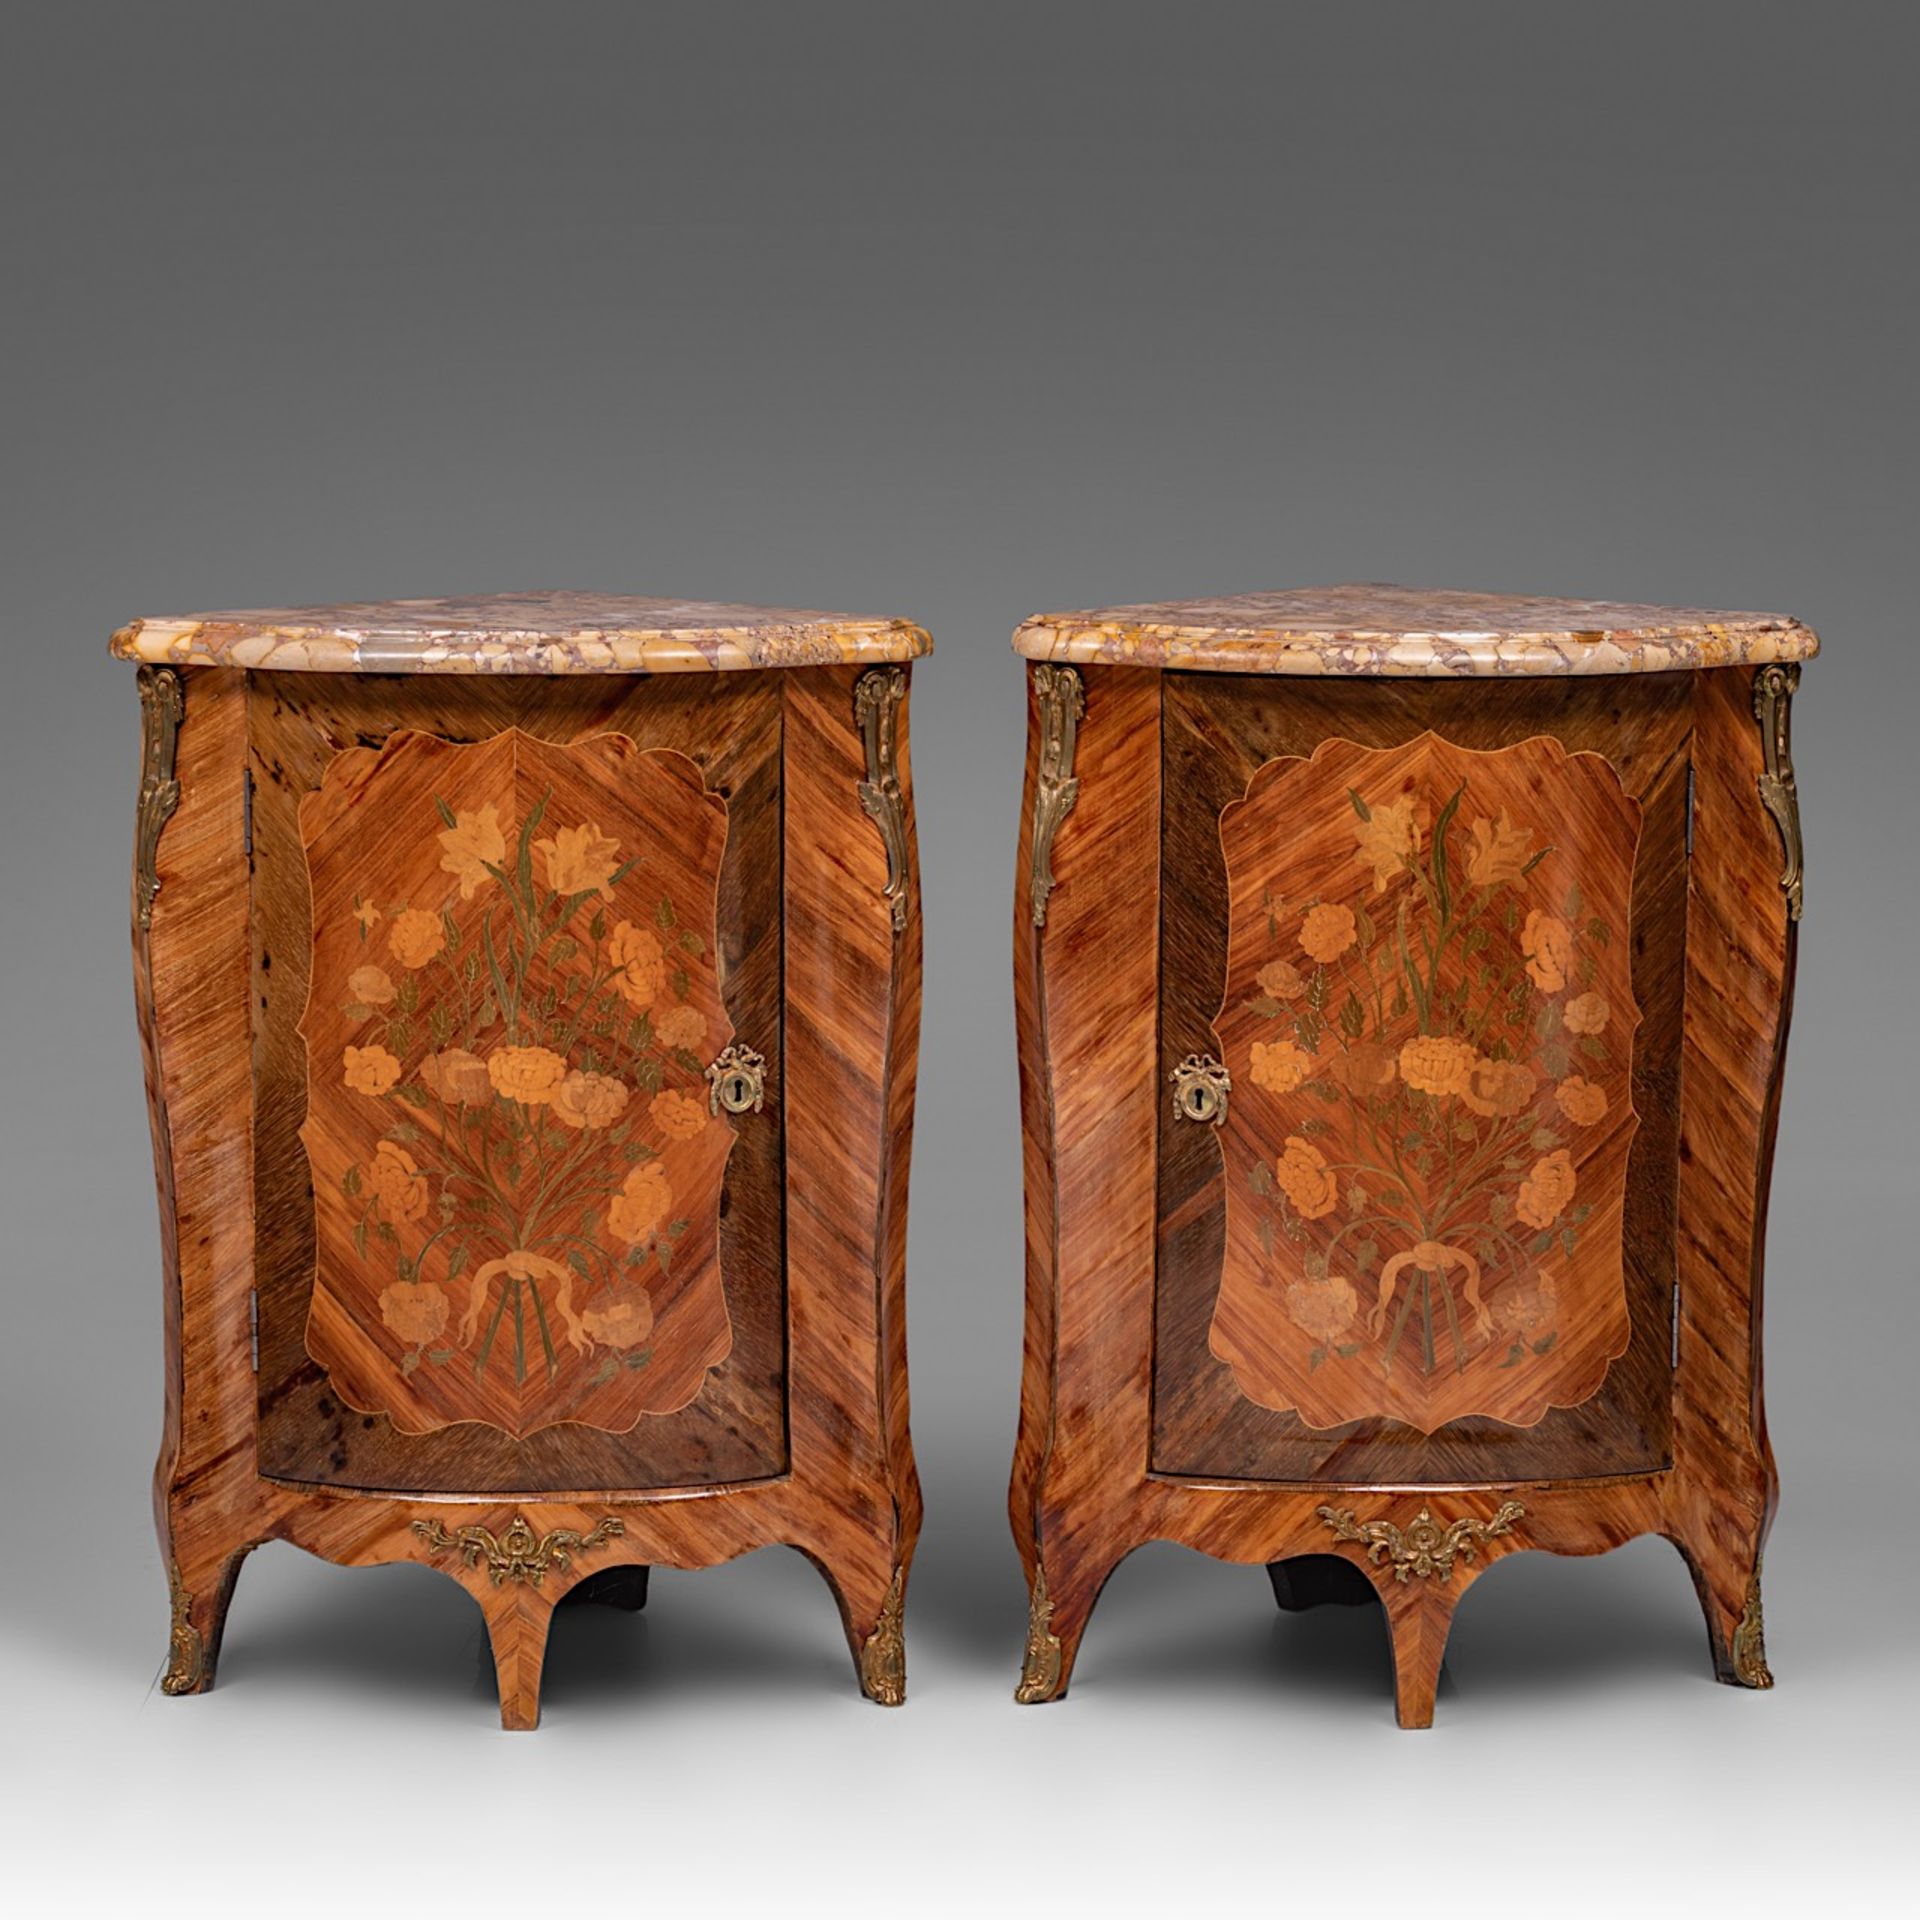 A fine pair of Louis XV 'encoignures' with floral marquetry and Breche d'Alep marble top, mid 18thC,